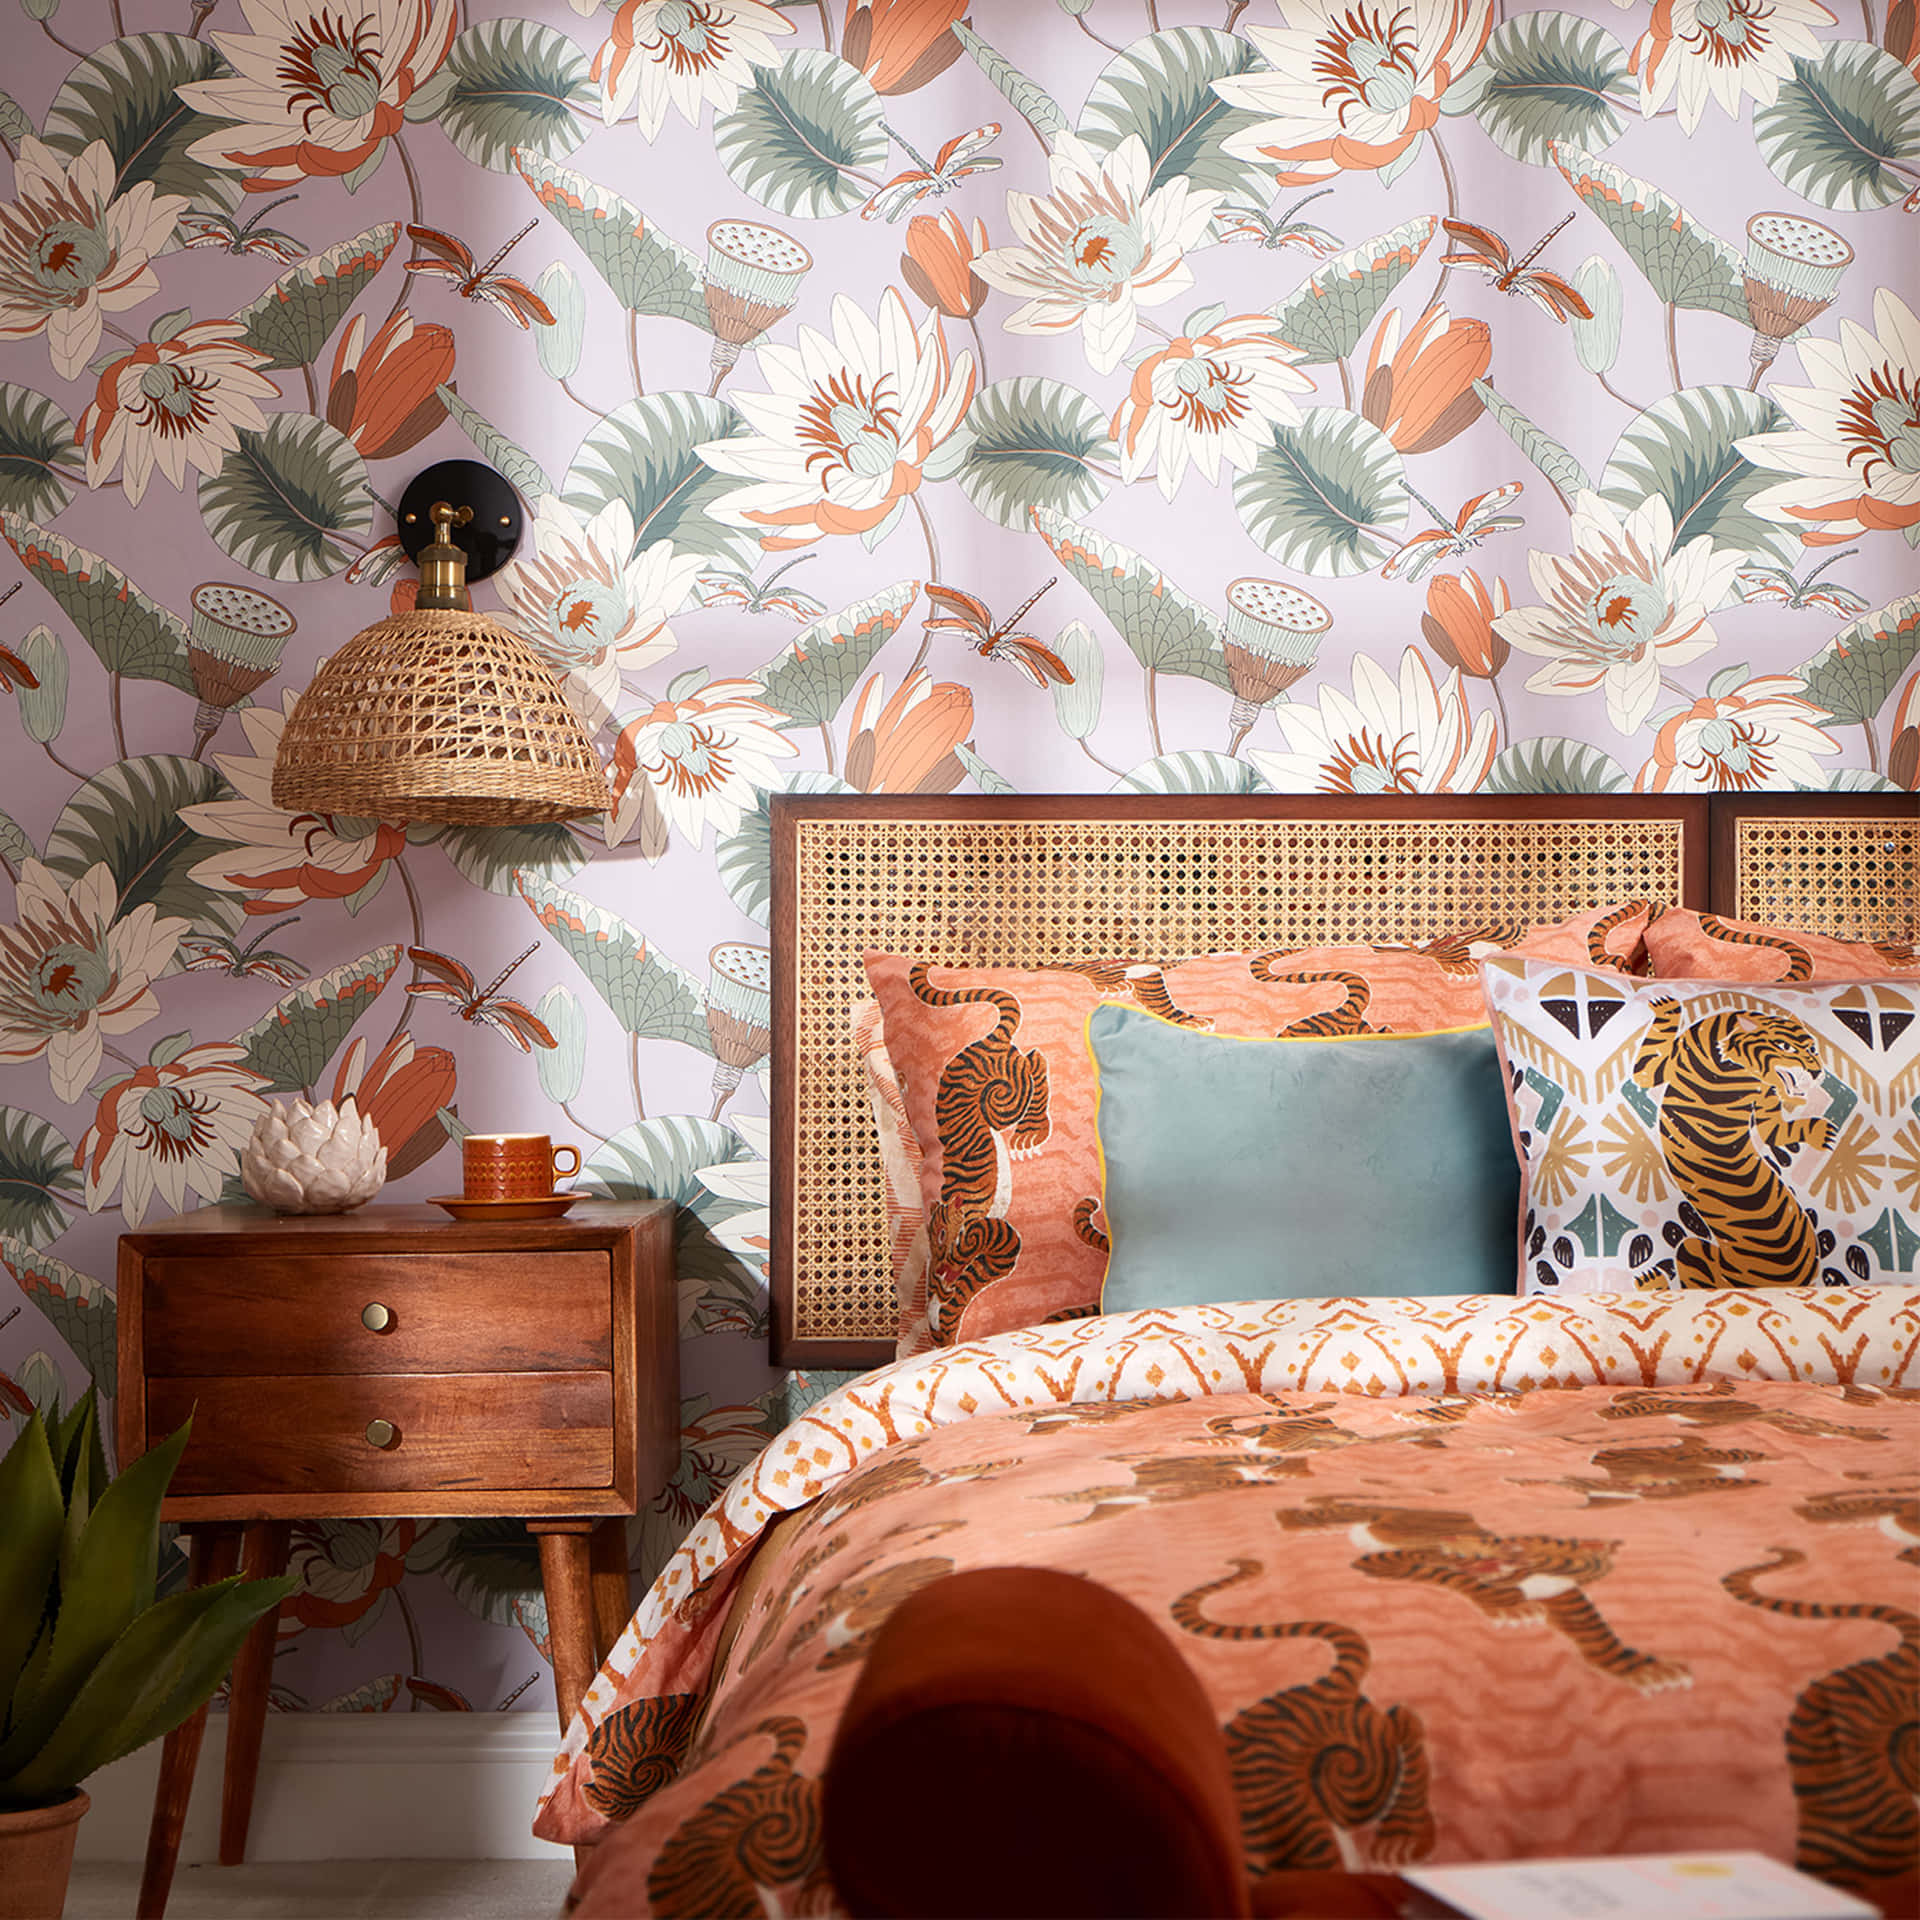 Woven Bed Headboard In Floral Wall Background